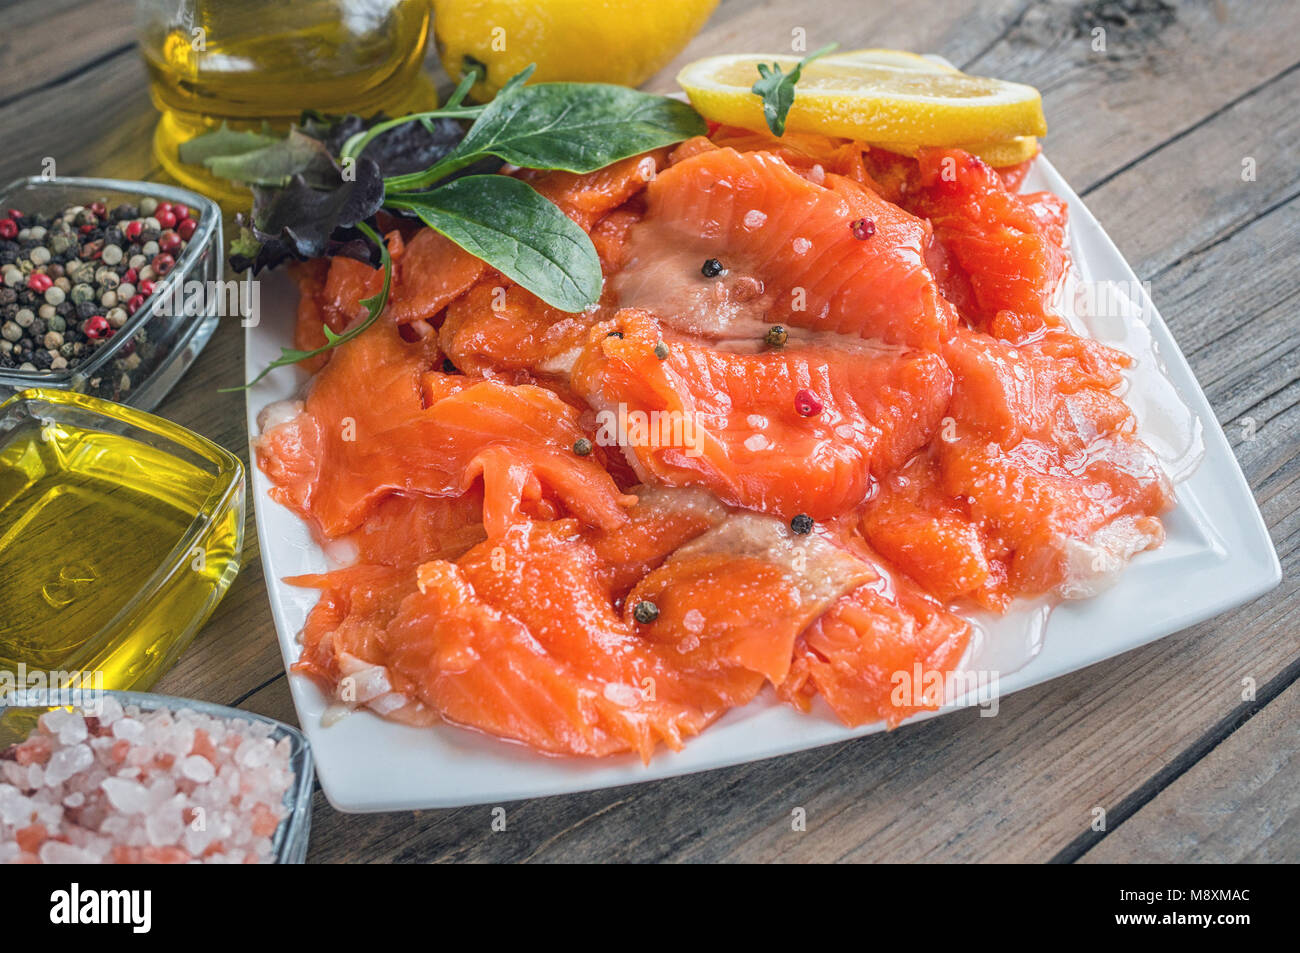 Raw pickled trout fillet and salmon pieces in a white plate. Wooden background. Healthy tasty food. Stock Photo